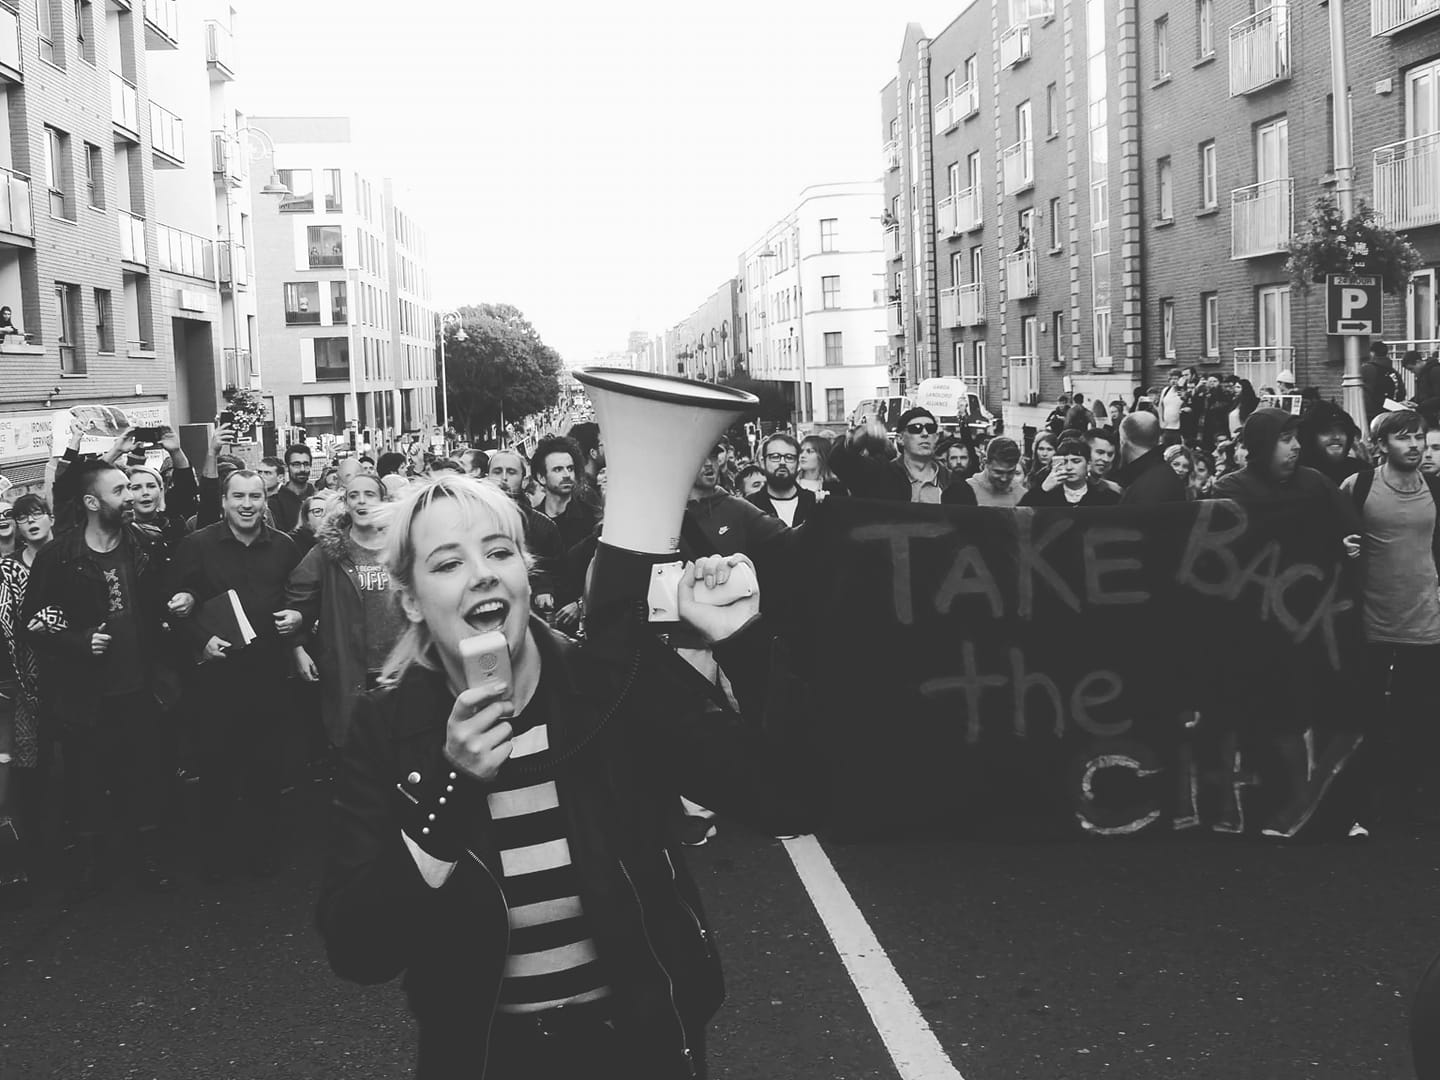 Protesters of the Take Back the City Dublin movement are walking down the street. A girl is holding a megaphone. The activists militate for a right to housing.